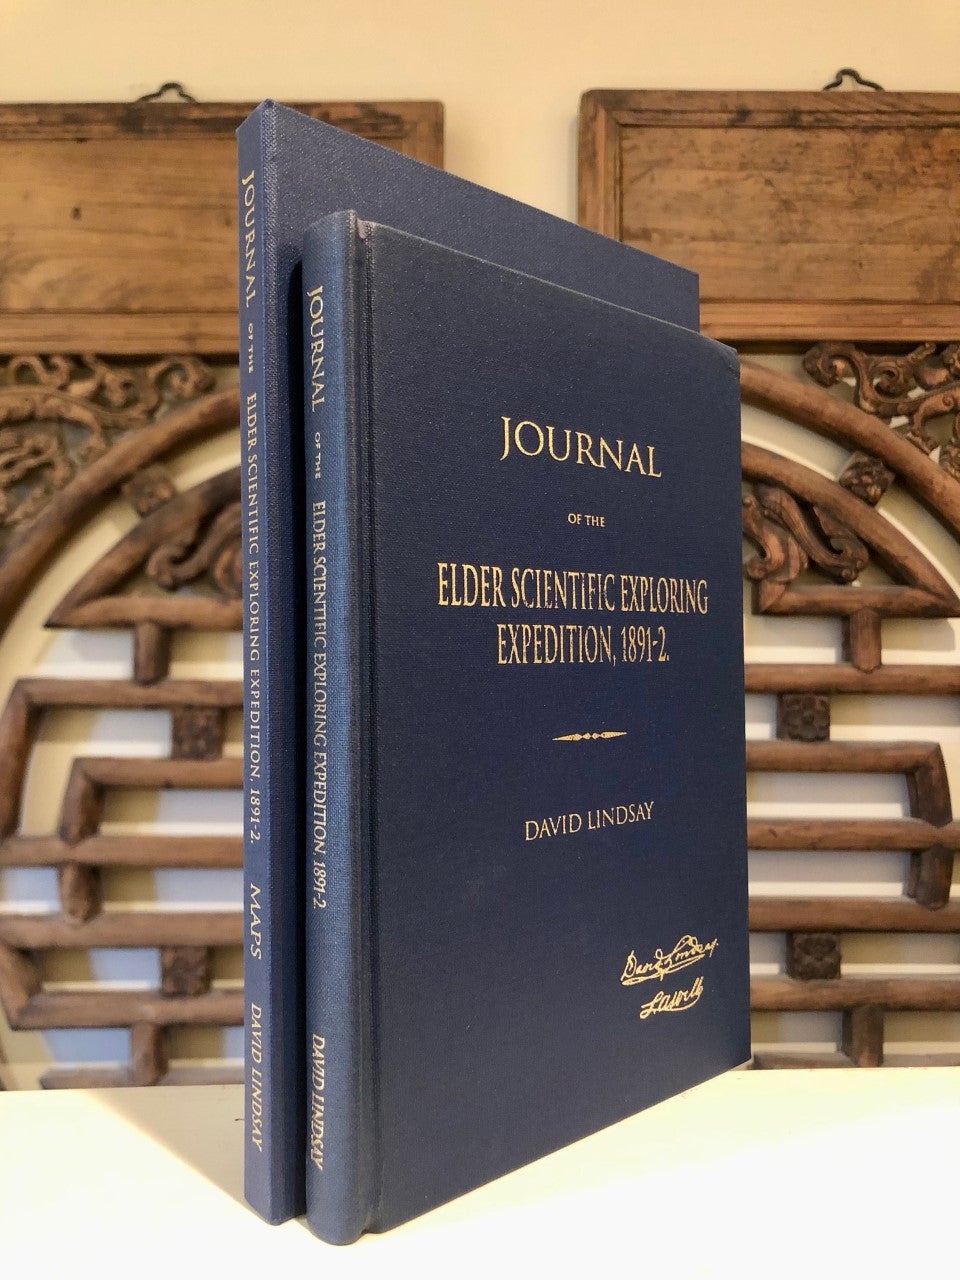 Journal of an Expedition